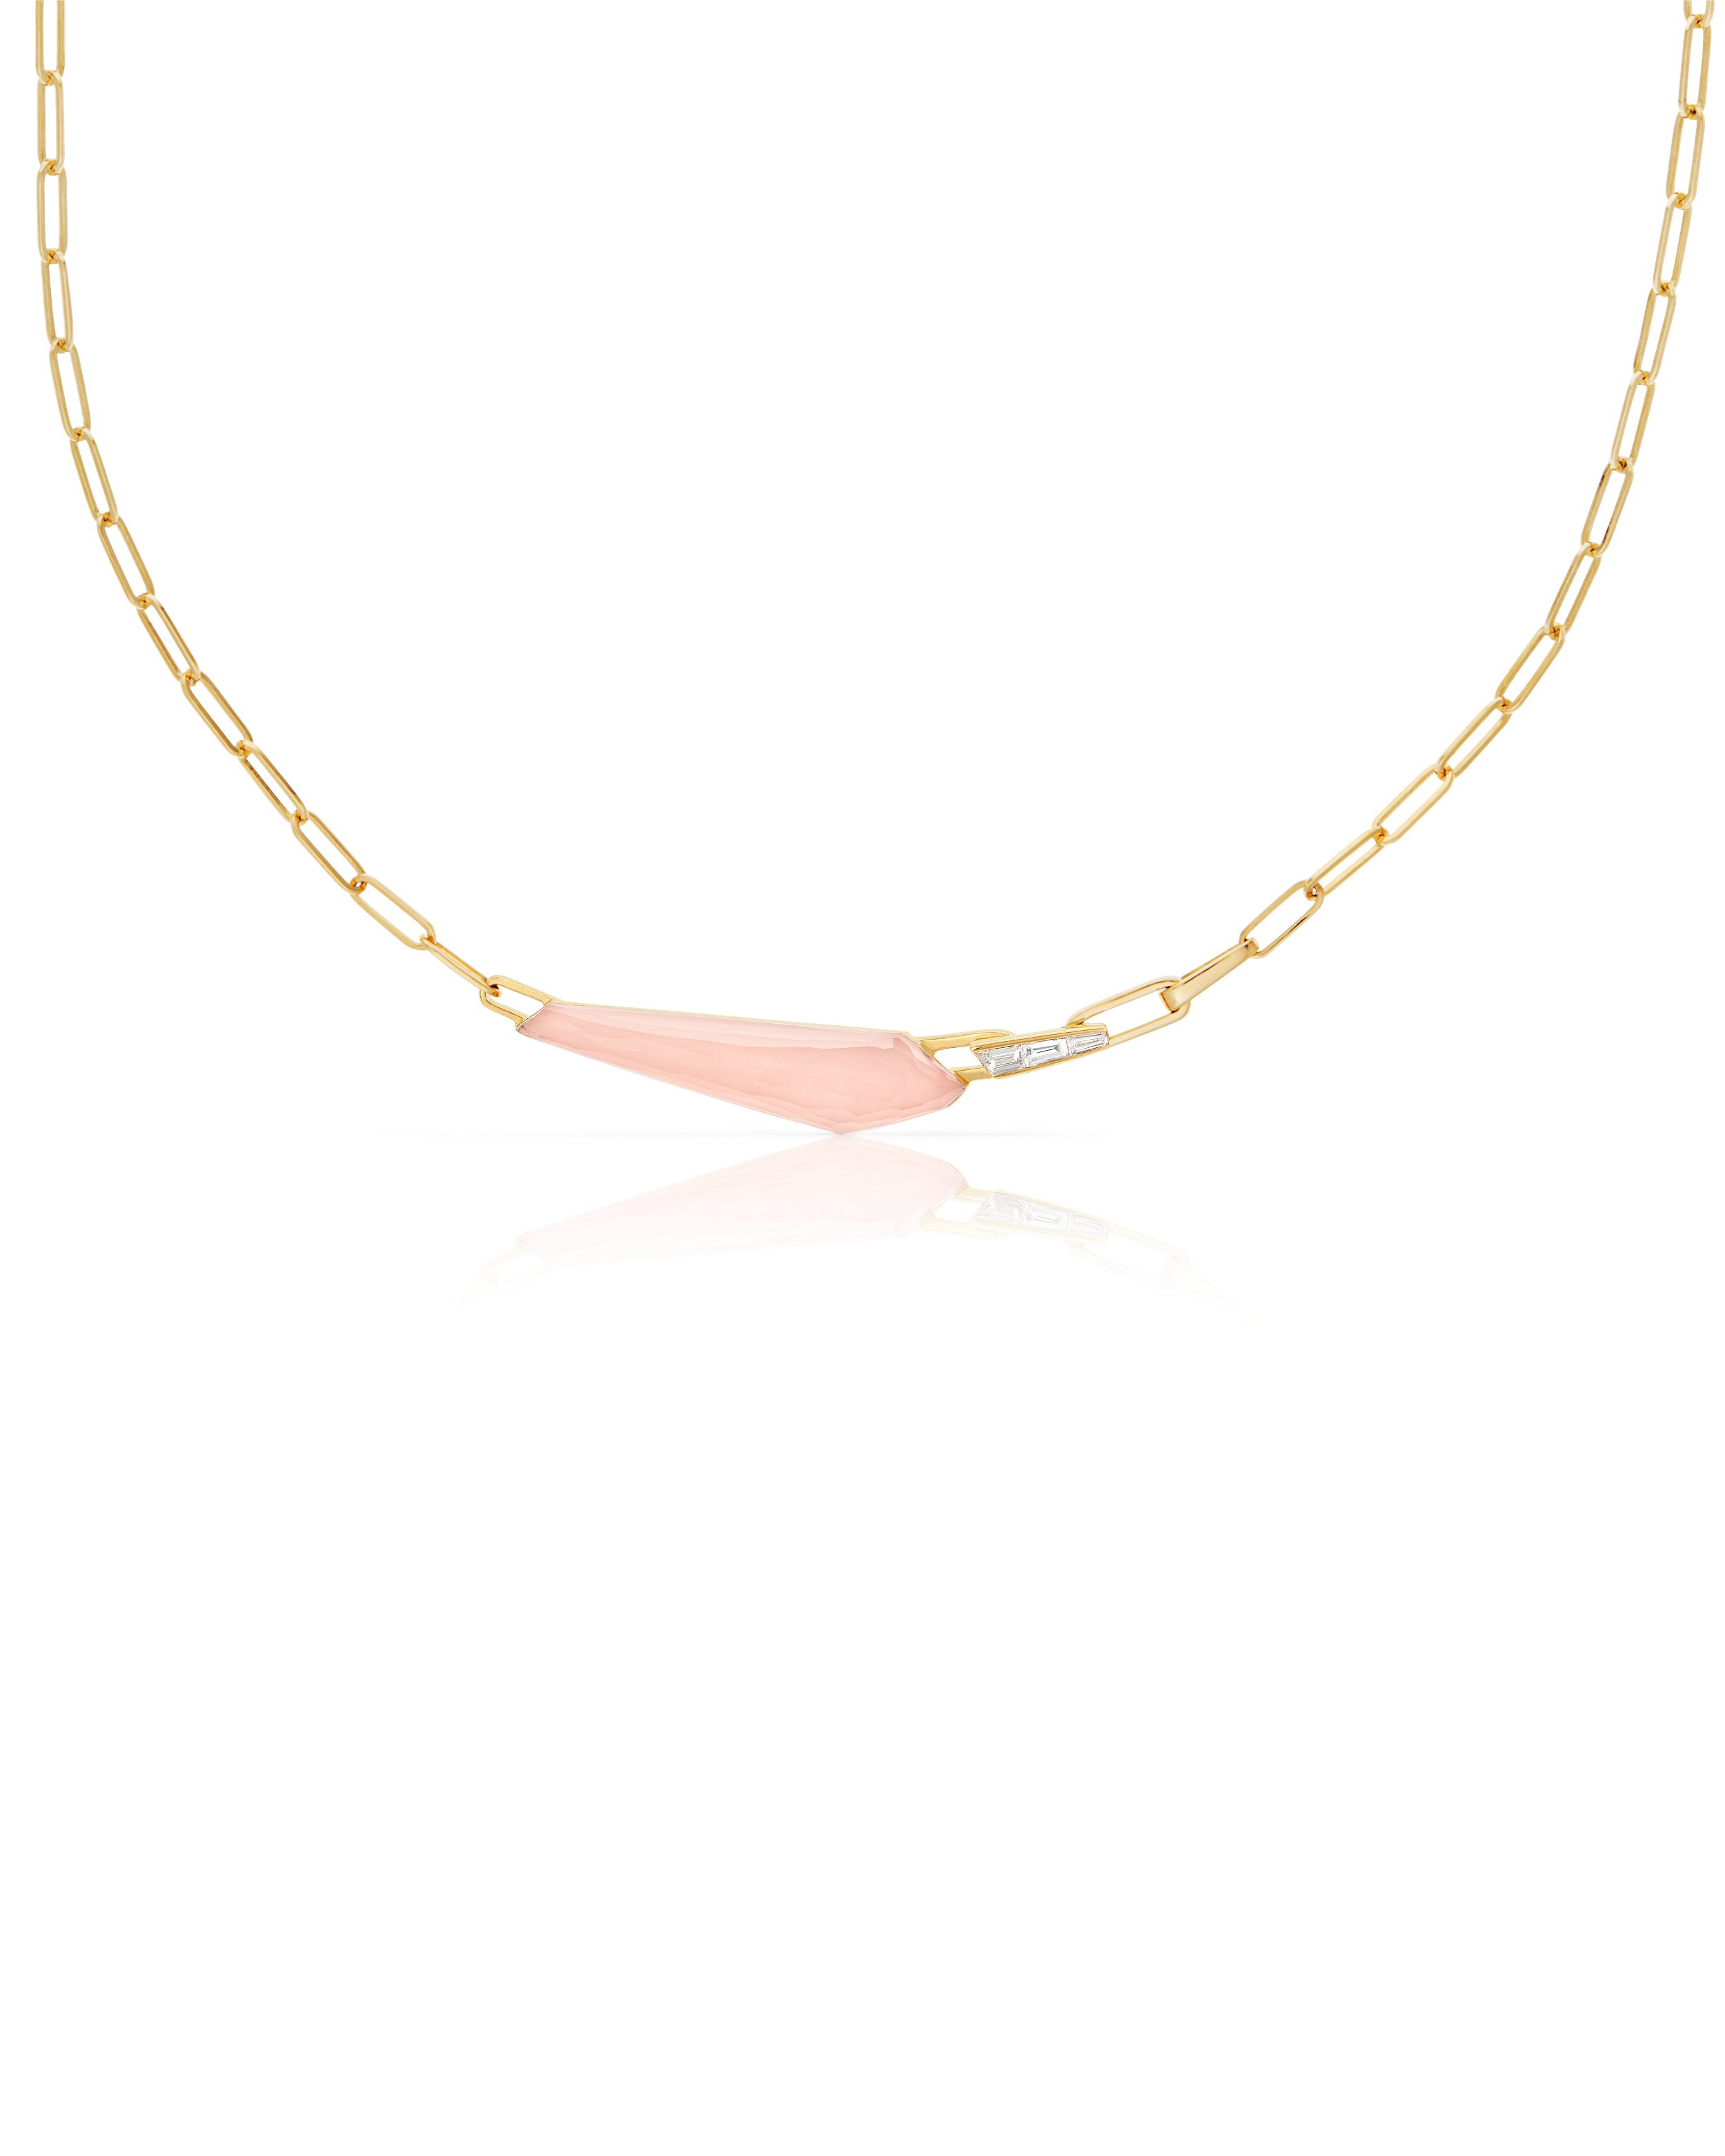 CH2 Shard Slimline Linked Choker Necklace with Peach Quartz in 18kt Yellow Gold - 16.5"